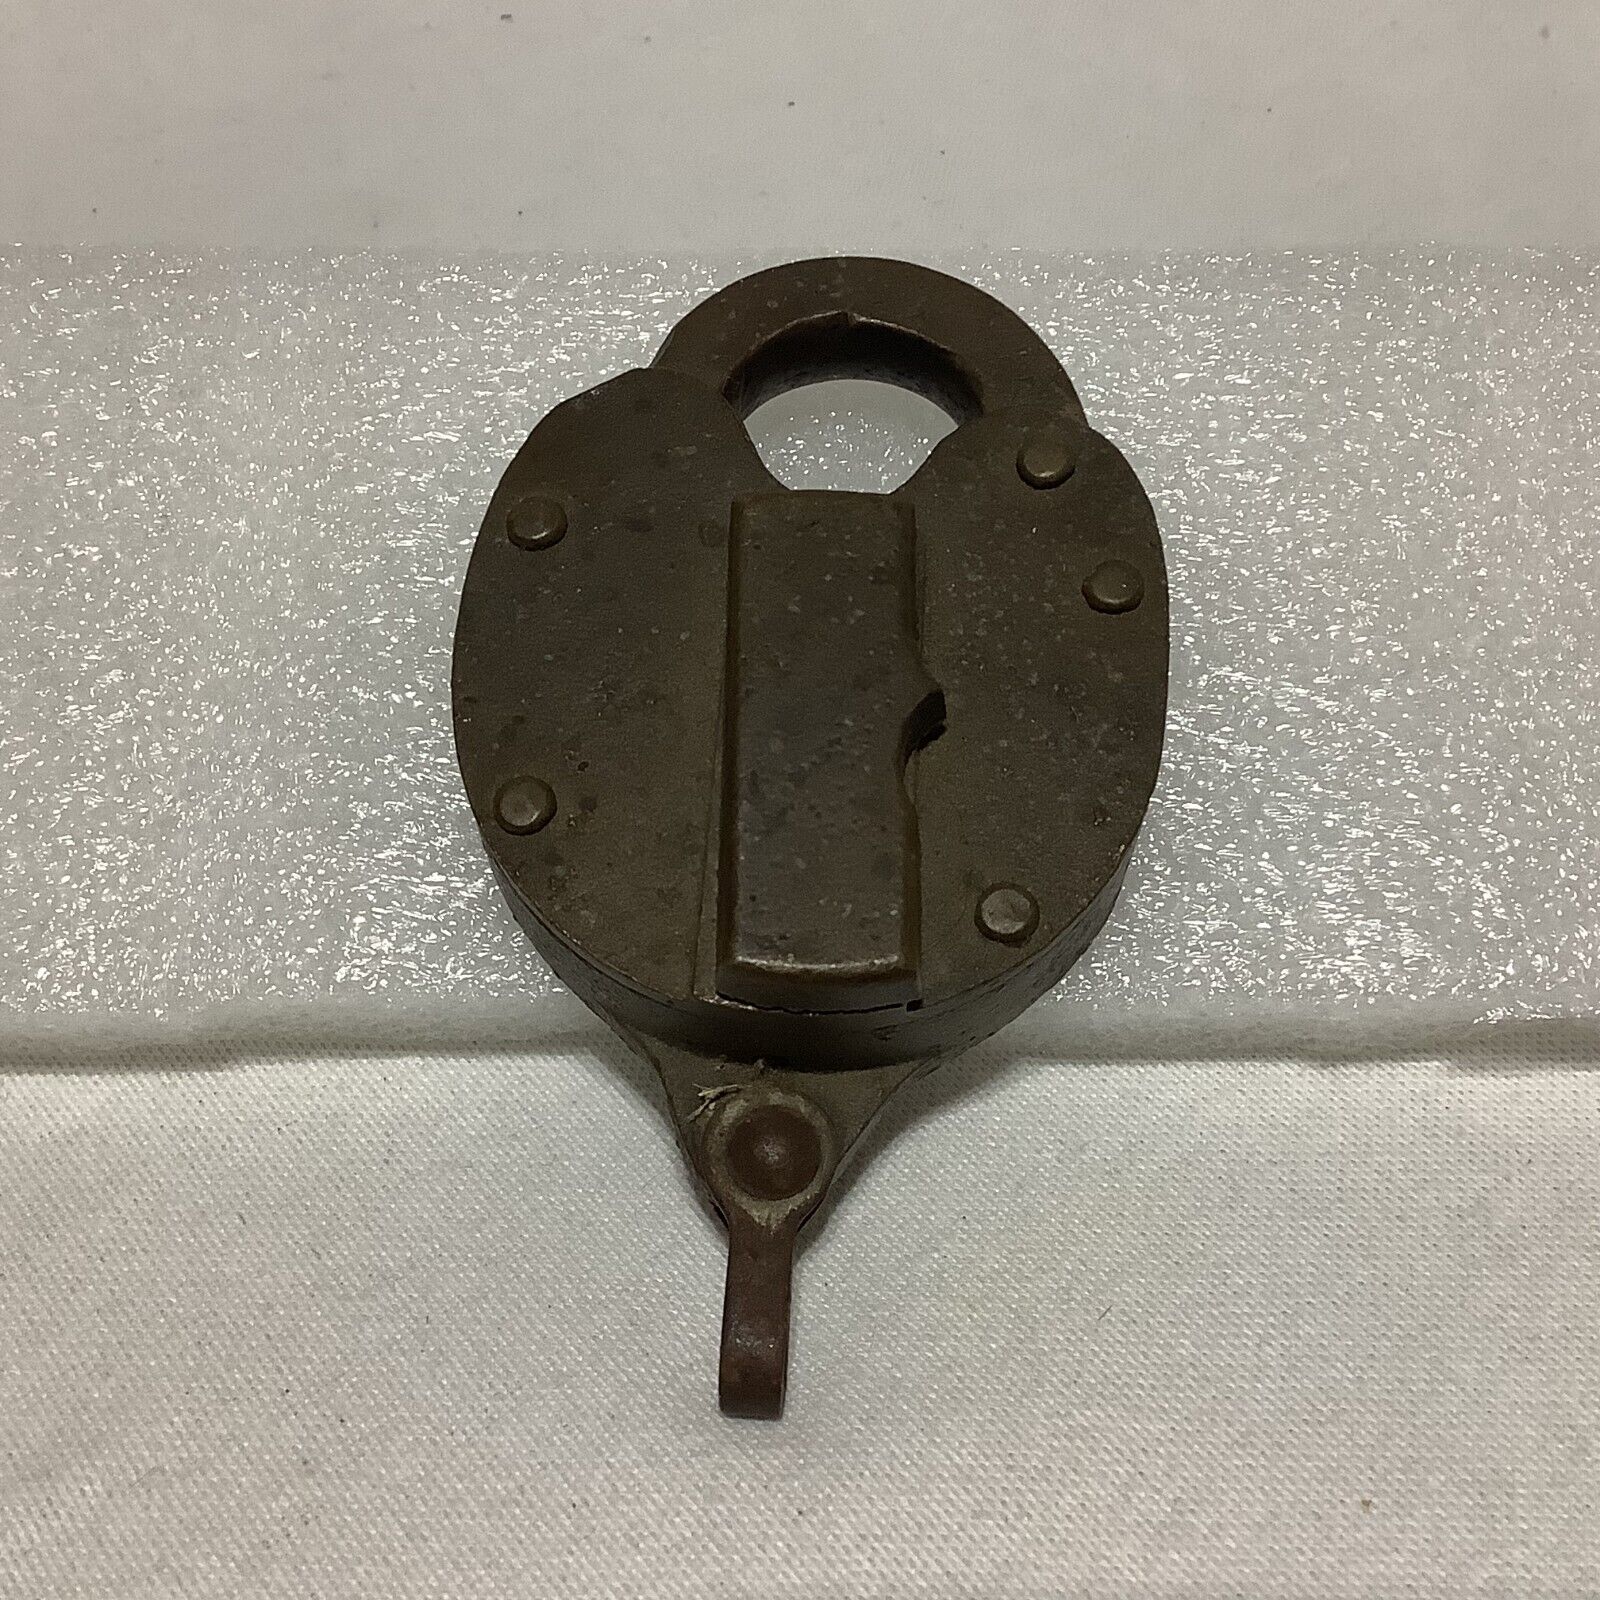 Vintage Antique Heavy Brass Padlock dated 1950 no key Swing keyhole cover